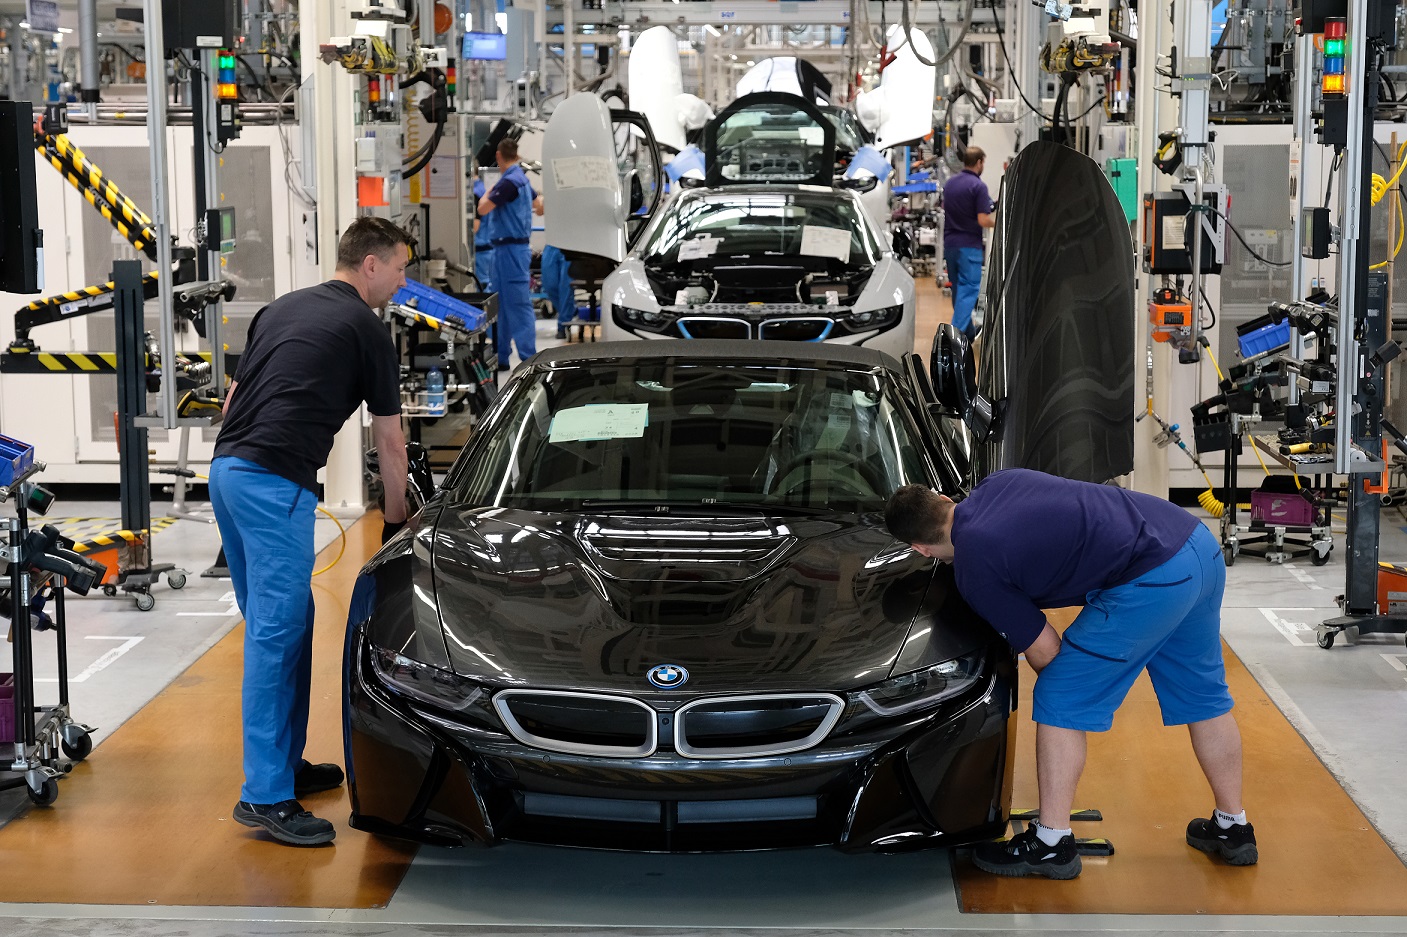 LEIPZIG, GERMANY - MAY 20: Workers assemble BMW I8 hybrid cars on the assembly line at the BMW factory on May 20, 2019 in Leipzig, Germany. German President Frank-Walter Steinmeier later spoke at a gathering of the plant's workers on the importance of Europe and urged the workers to vote in upcoming European parliamentary elections. (Photo by Sean Gallup/Getty Images)